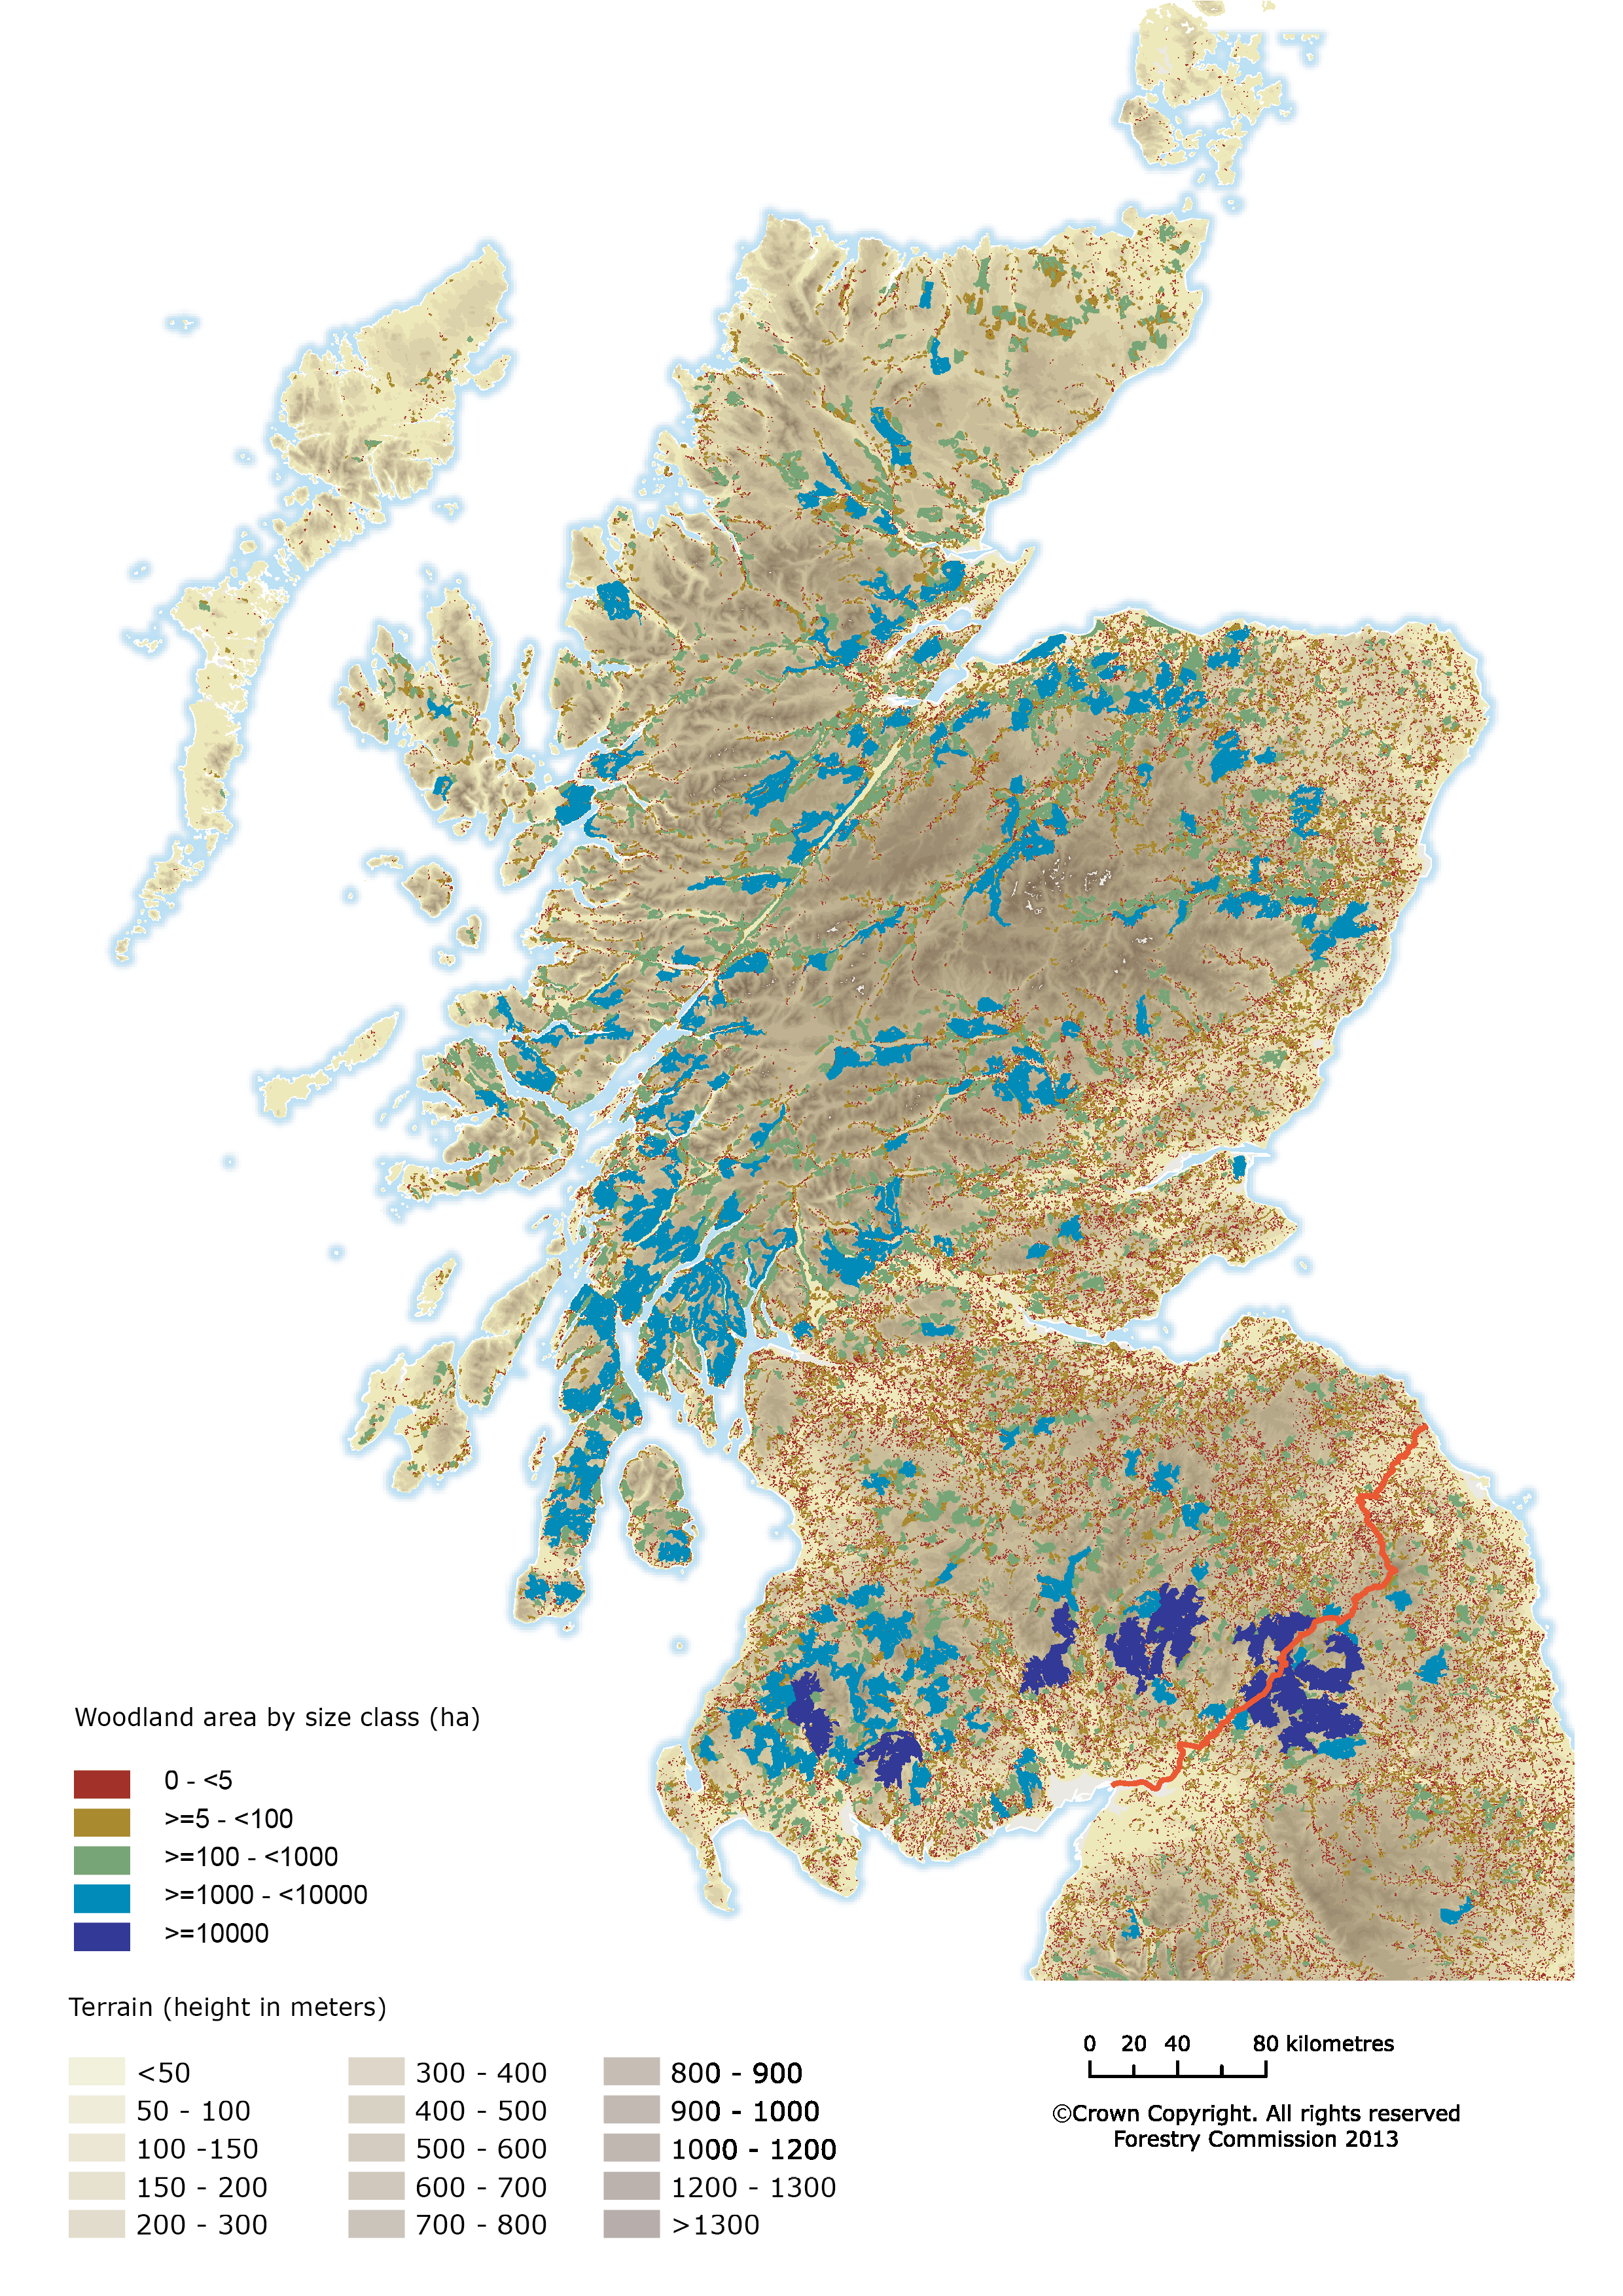 The largest woodlands in Scotland are in the south and west